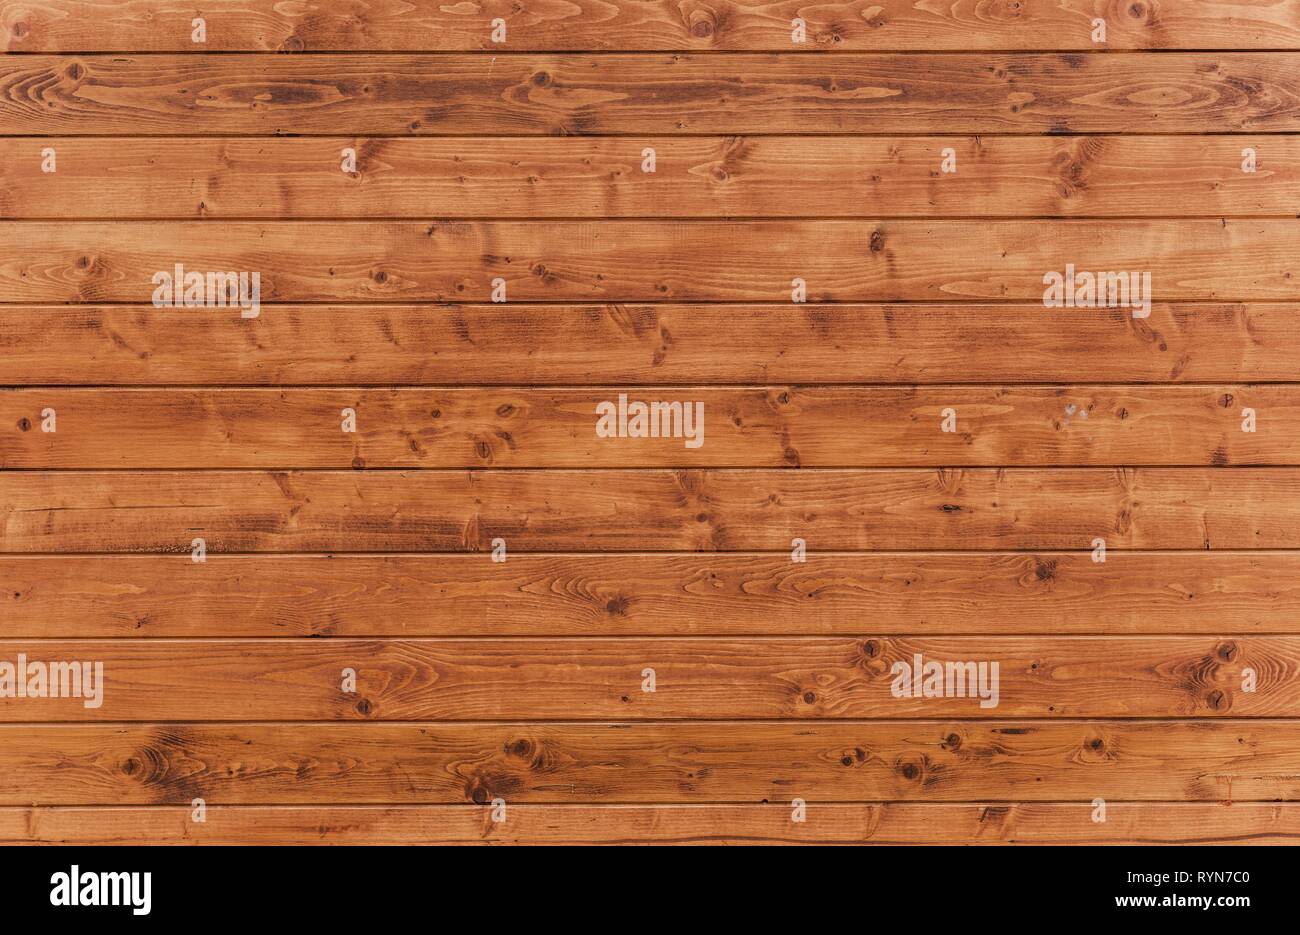 Wood Wall Planks Photo Background Home Interior Finishing